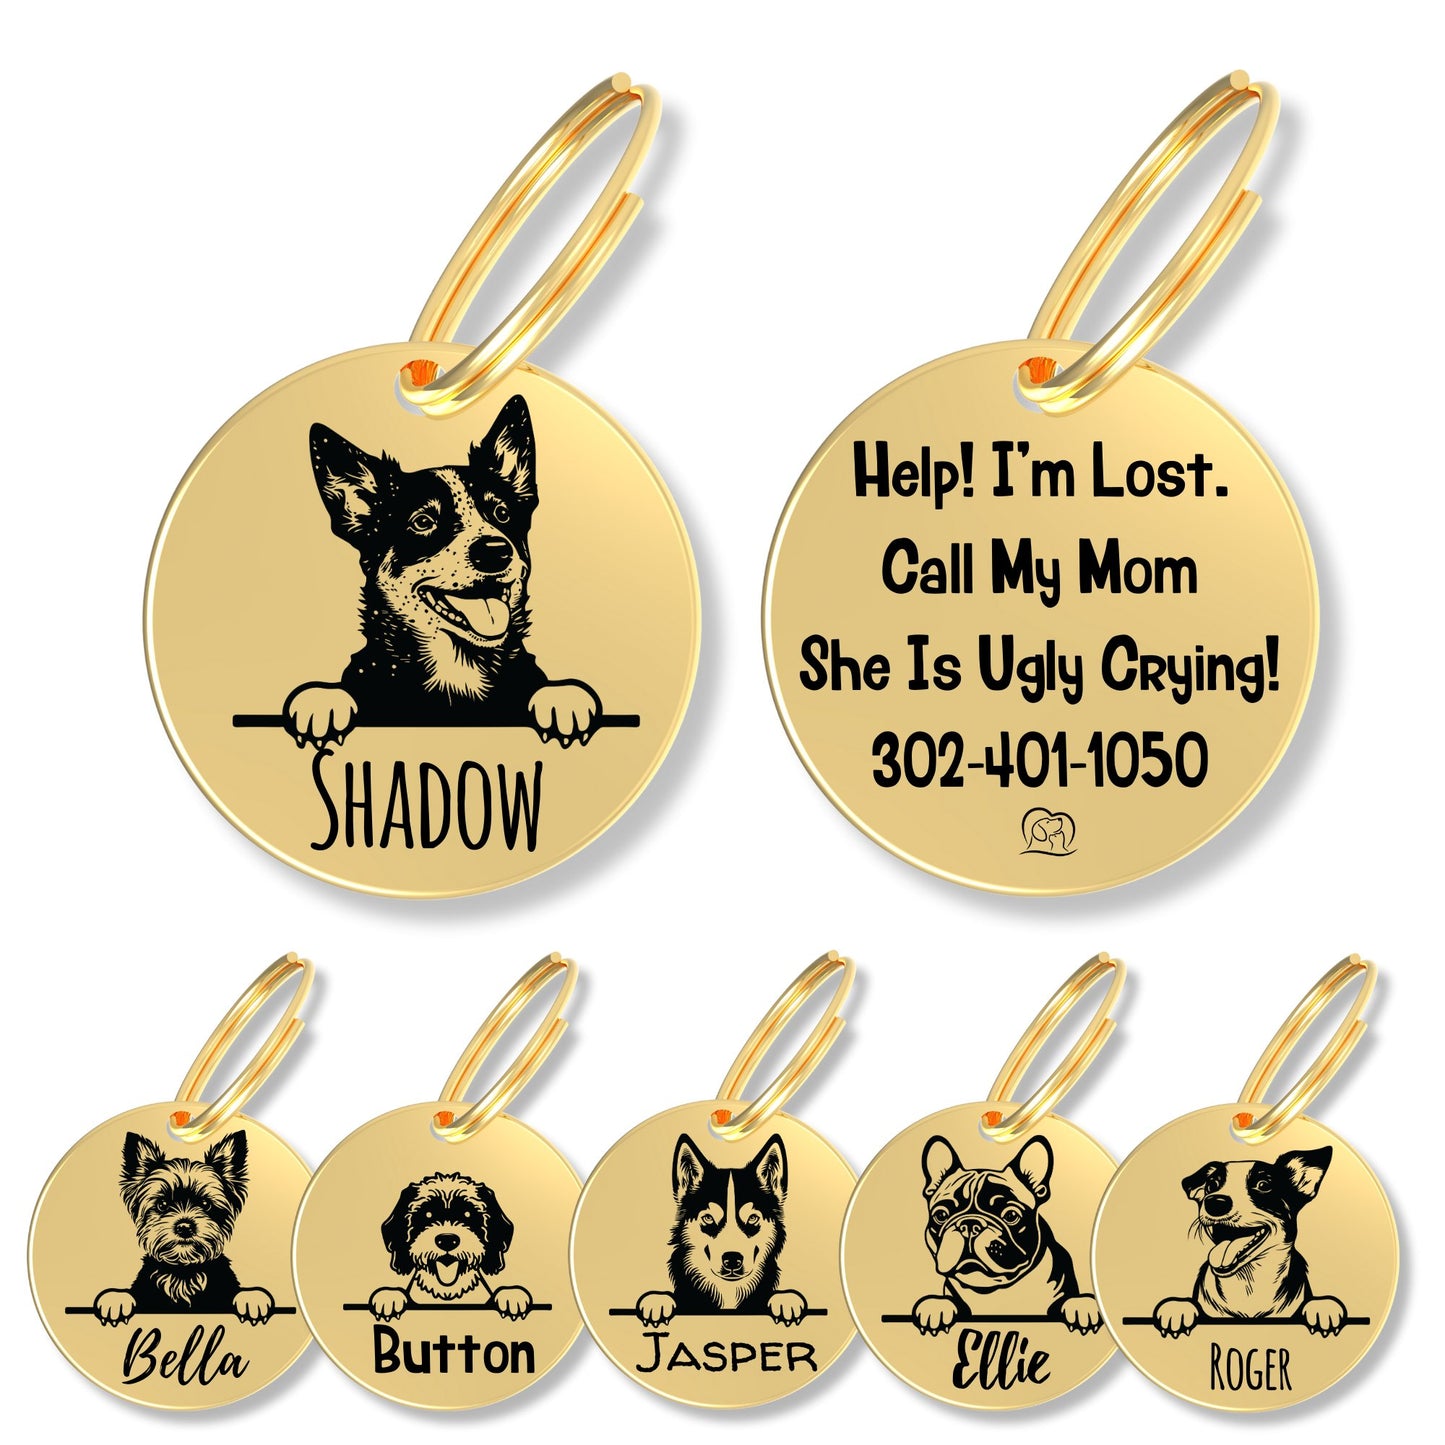 Breed Dog Tag - Personalized Breed Dog Tag (Blue Heeler)